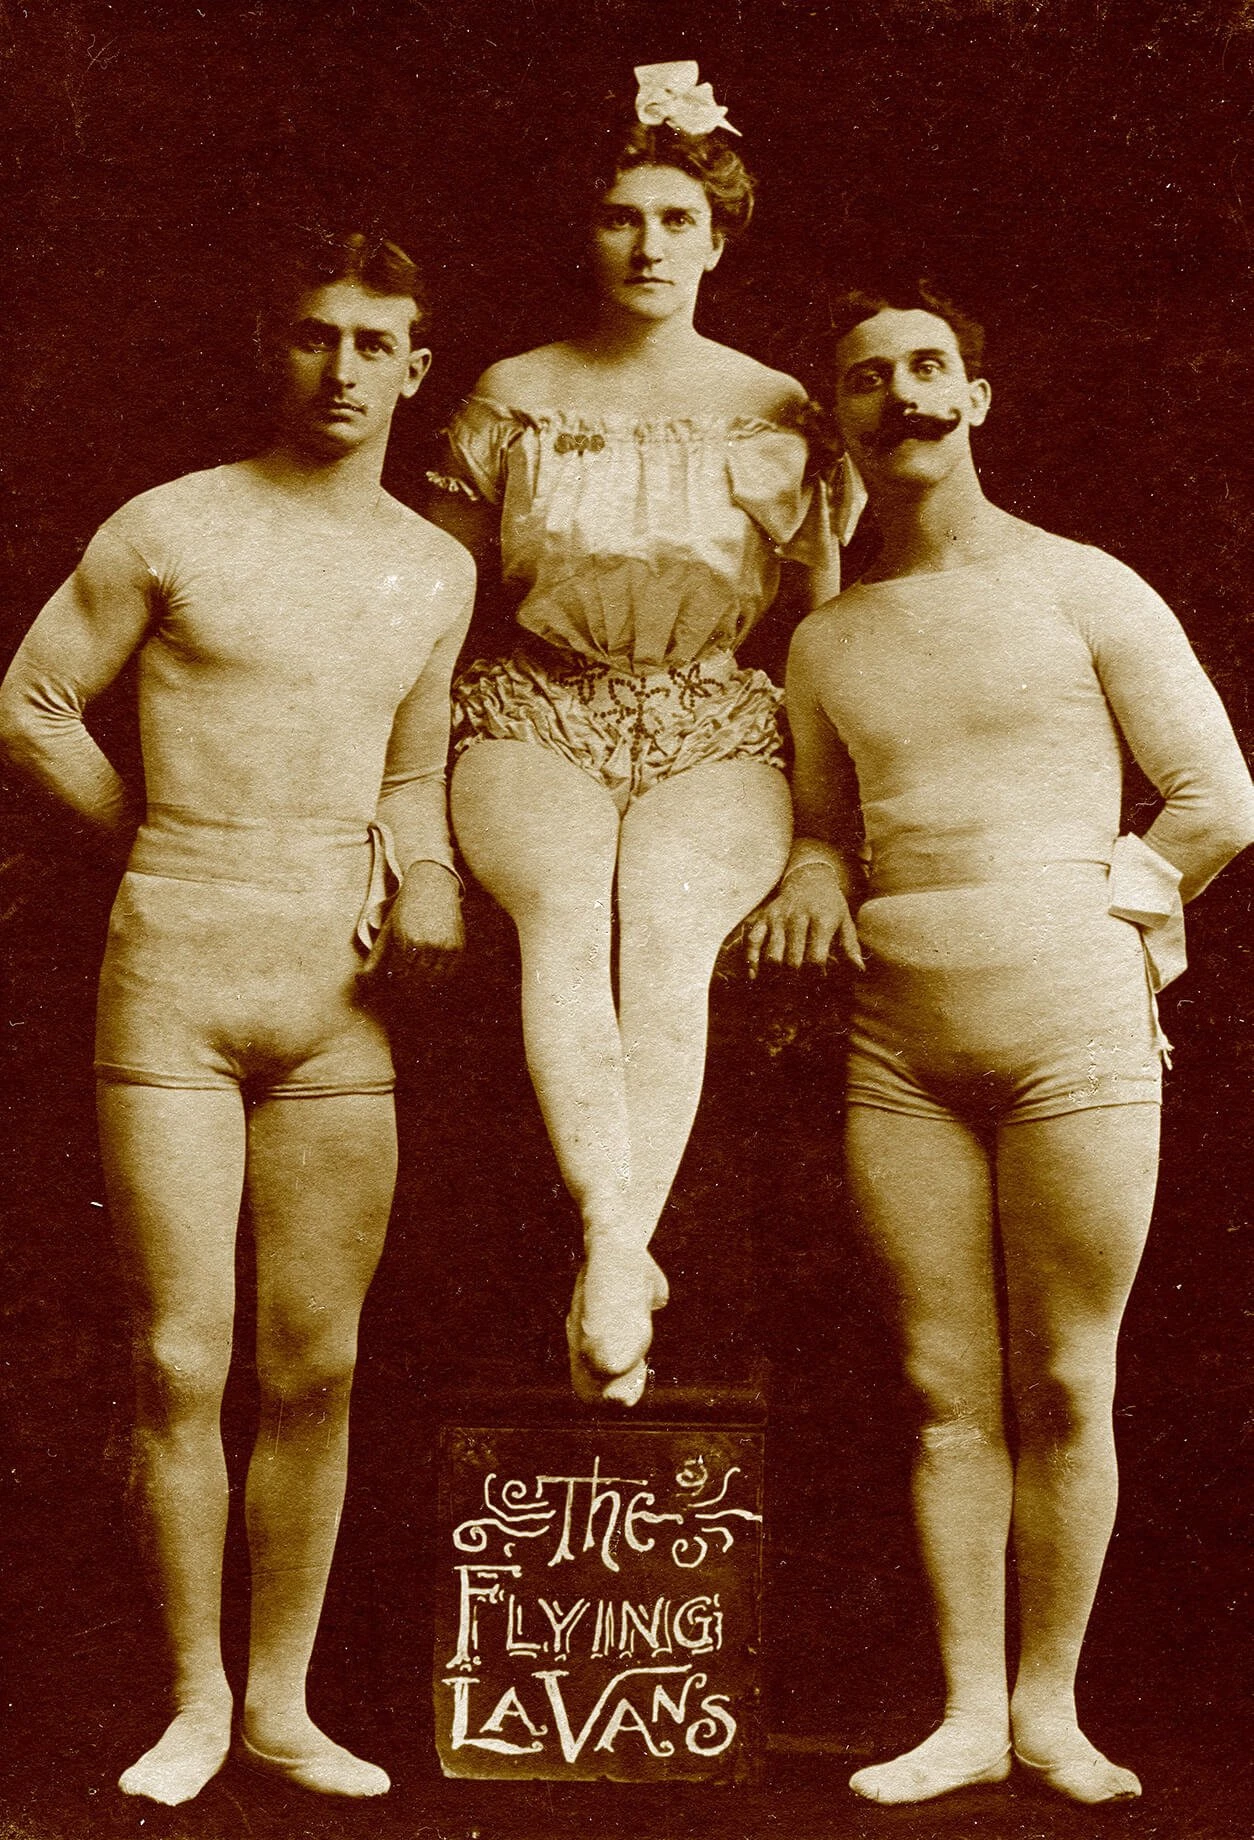 Full-length black and white photograph. The brothers are standing on either side and Amy is seated on something tall in the center. She is wearing a light colored off-the-shoulder ruffly shirt and ruffly short shorts, with a bead or sparkle detail around the hips. Tights cover the entire length of her legs. The men are wearing long-sleeved very tight lightly colored shirts and very short tight shorts. They are also wearing tights that cover the entire length of their legs and feet.